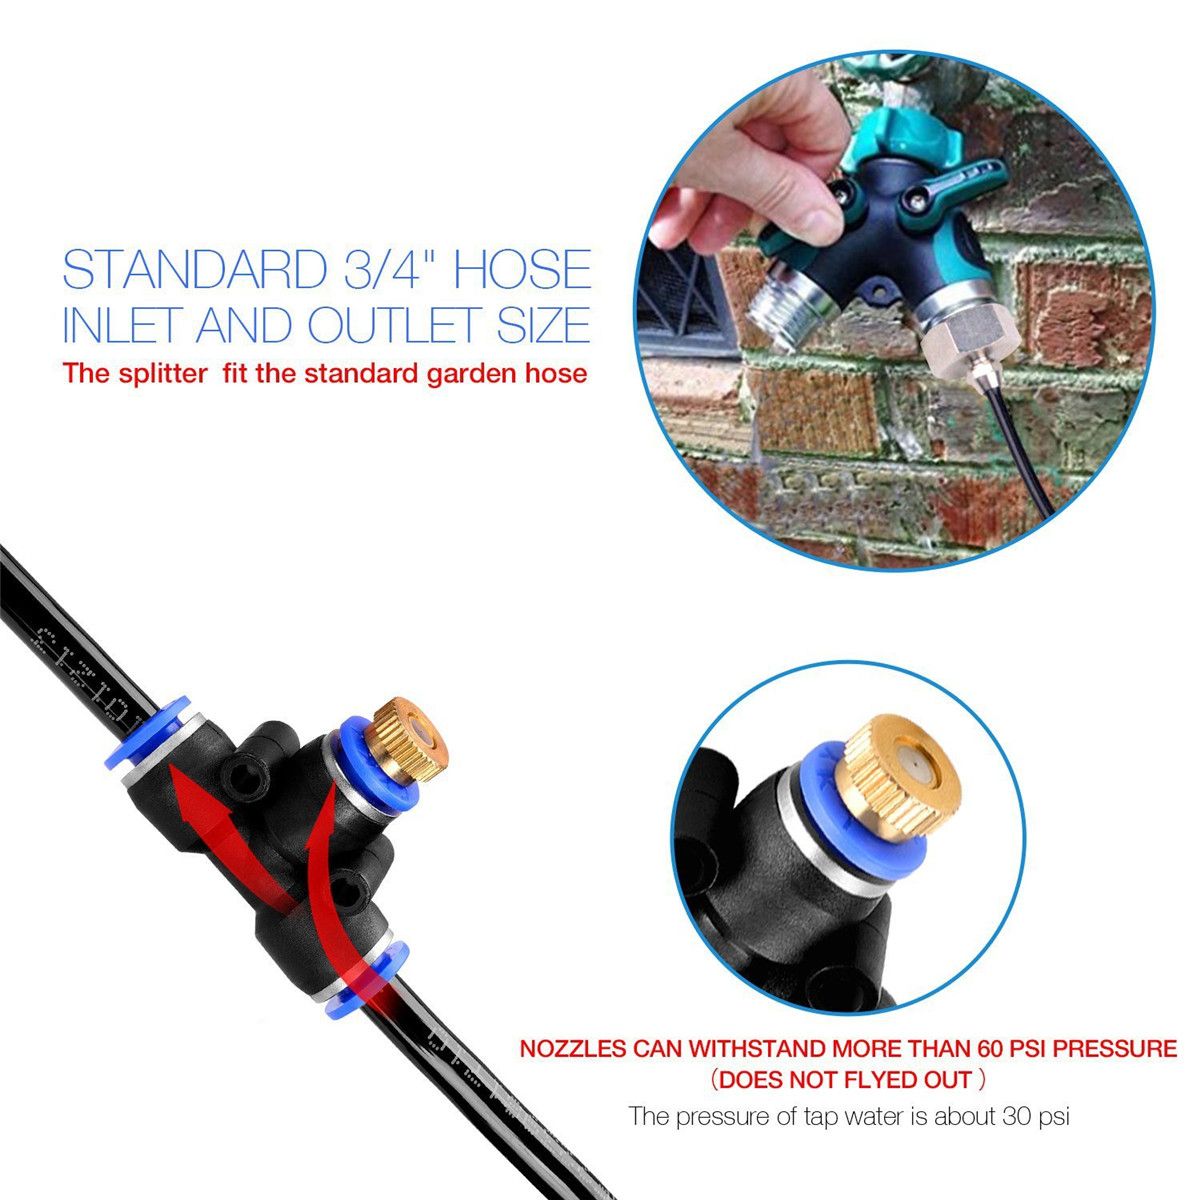 20M3M-Outdoor-Mist-Coolant-System-Water-Sprinkler-Garden-Patio-Mister-Cooling-Spray-Kits-Micro-Irrig-1531316